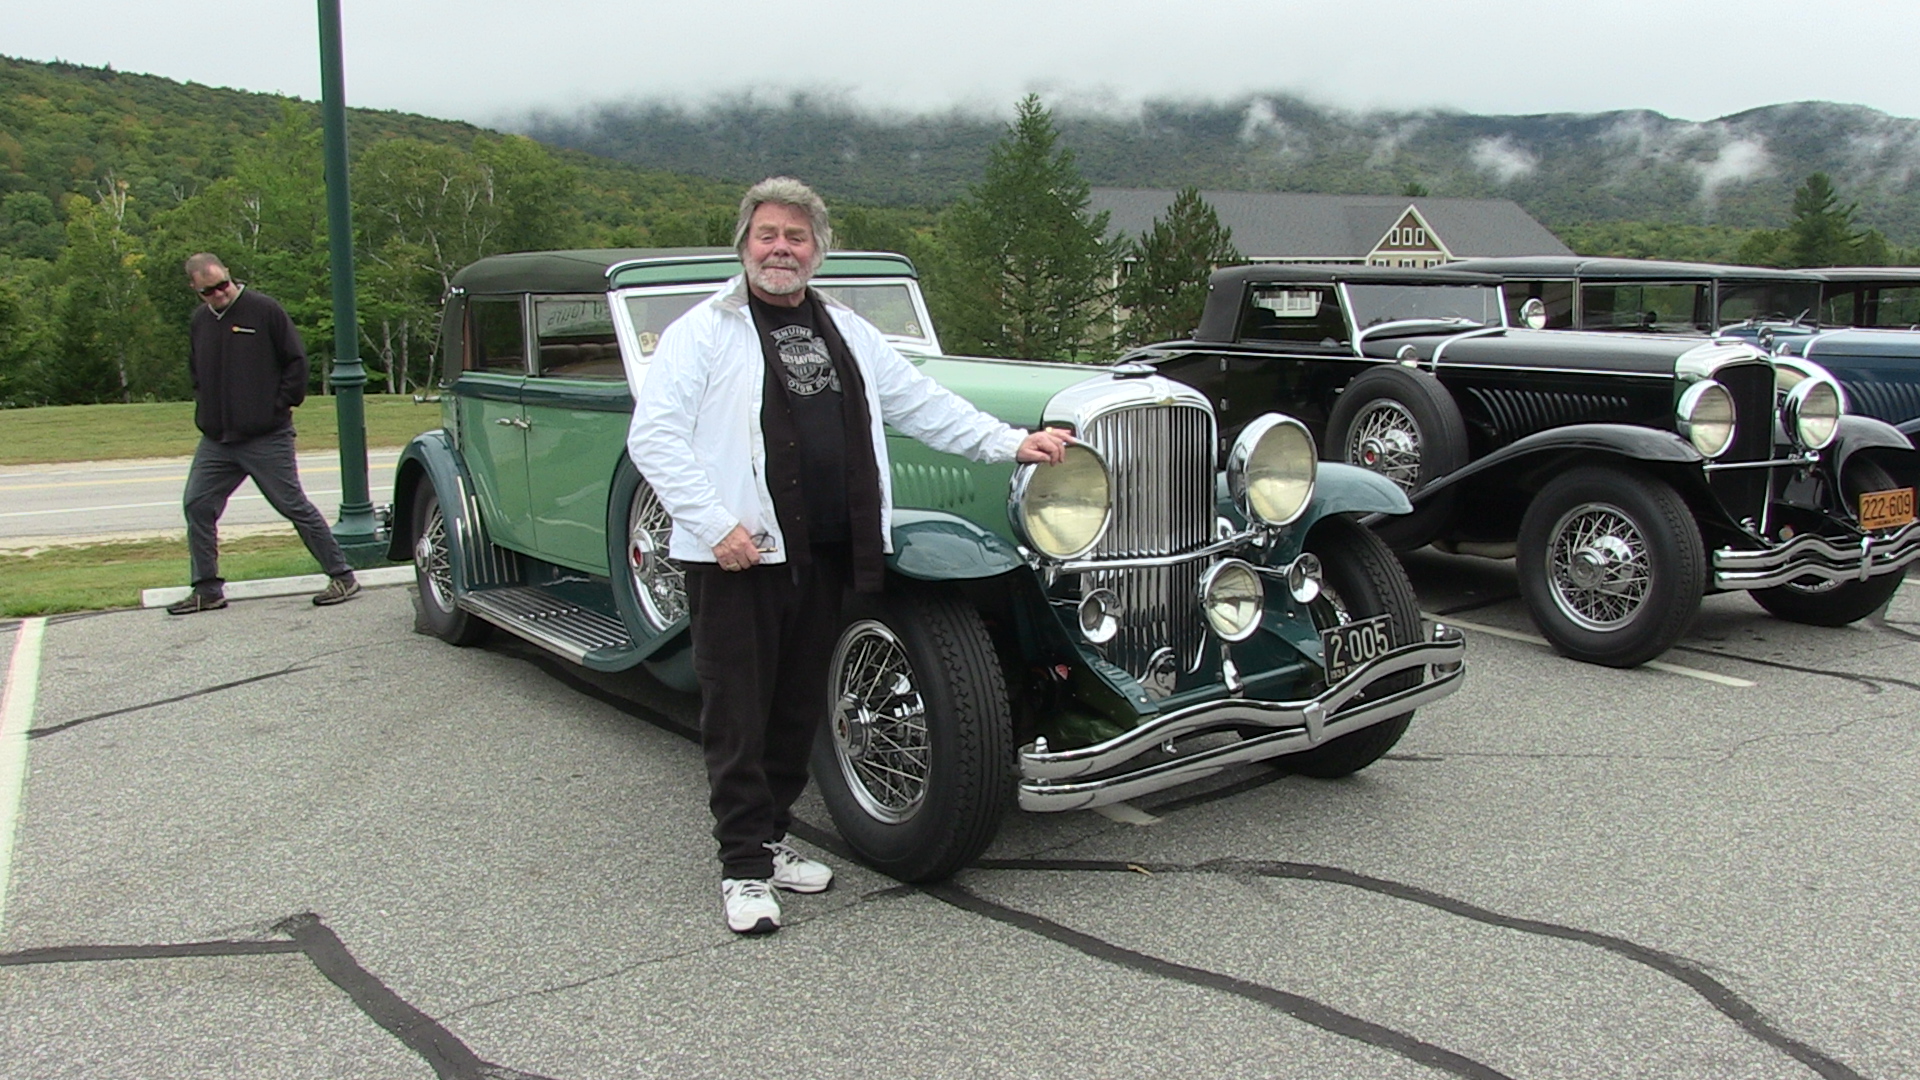 Dick Shappy posing with his 1934 Duesenberg J-505 by Derham